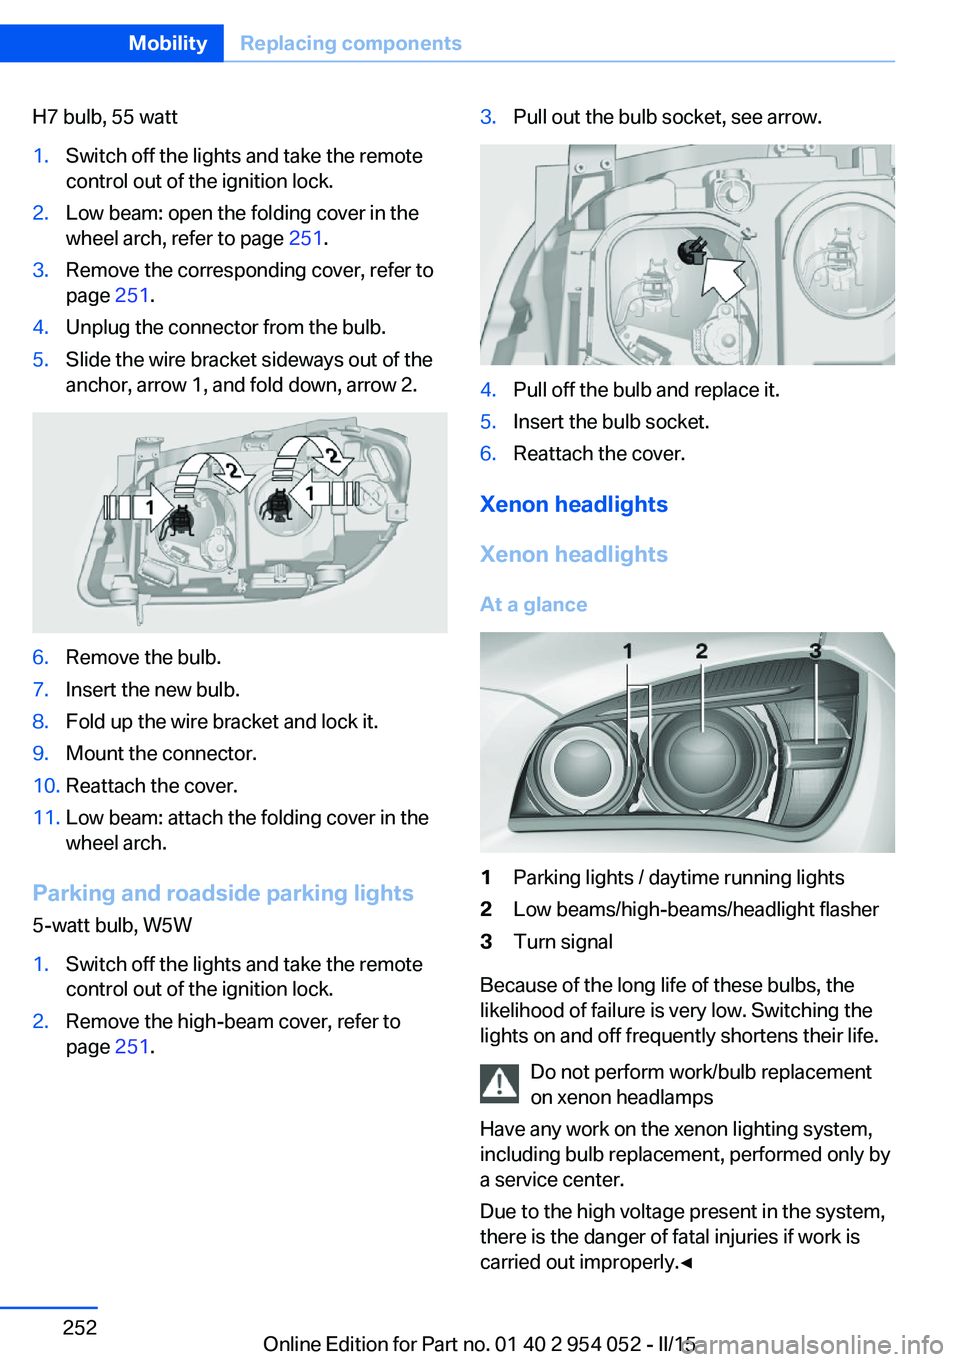 BMW X1 SDRIVE28I 2015 User Guide H7 bulb, 55 watt1.Switch off the lights and take the remote
control out of the ignition lock.2.Low beam: open the folding cover in the
wheel arch, refer to page  251.3.Remove the corresponding cover, 